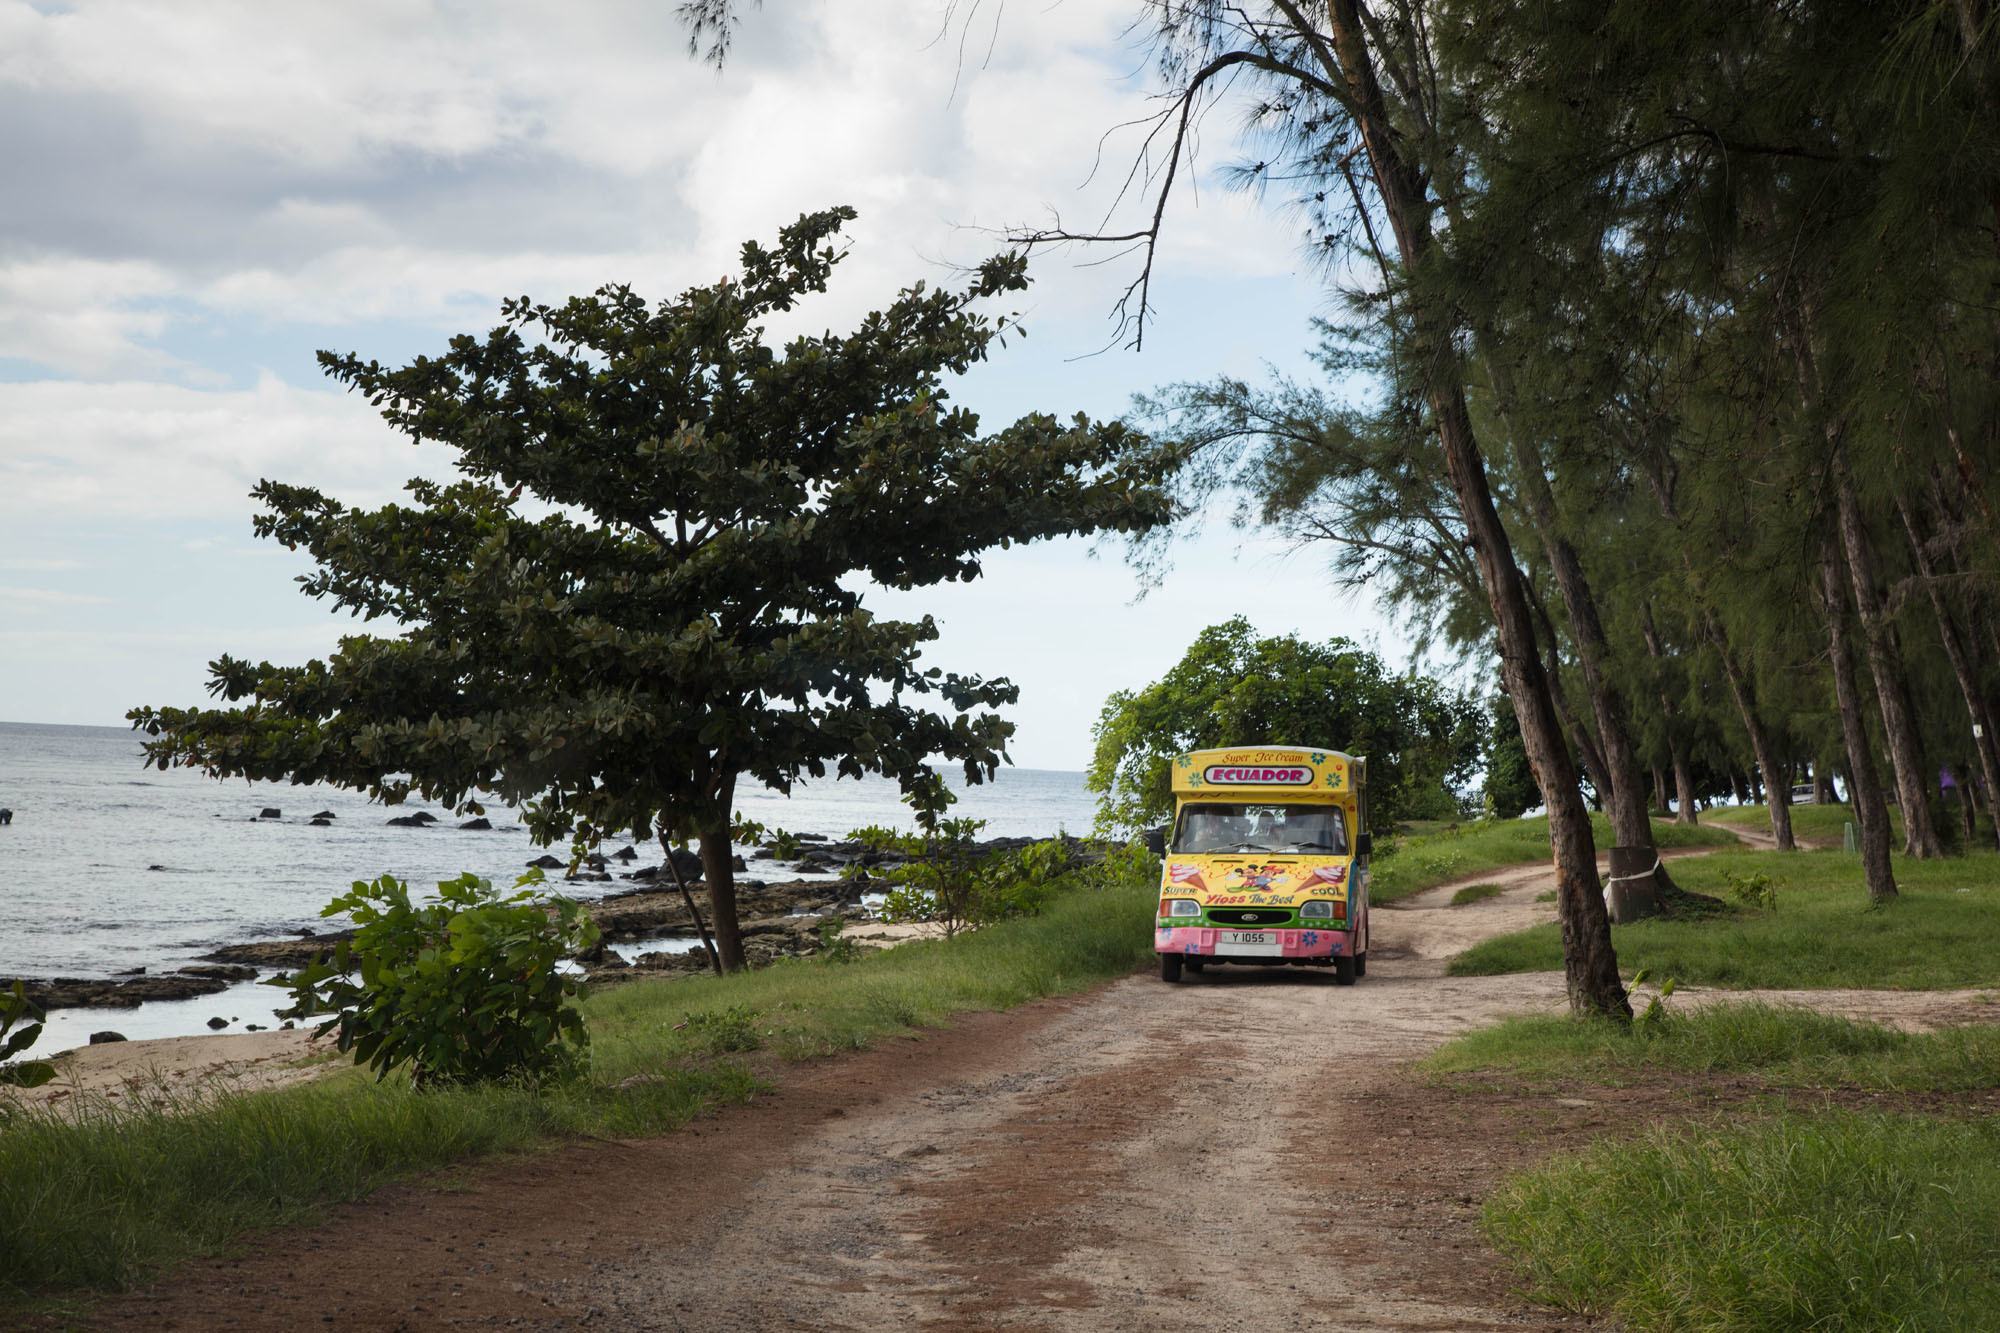 An ice cream truck on its route between beaches.